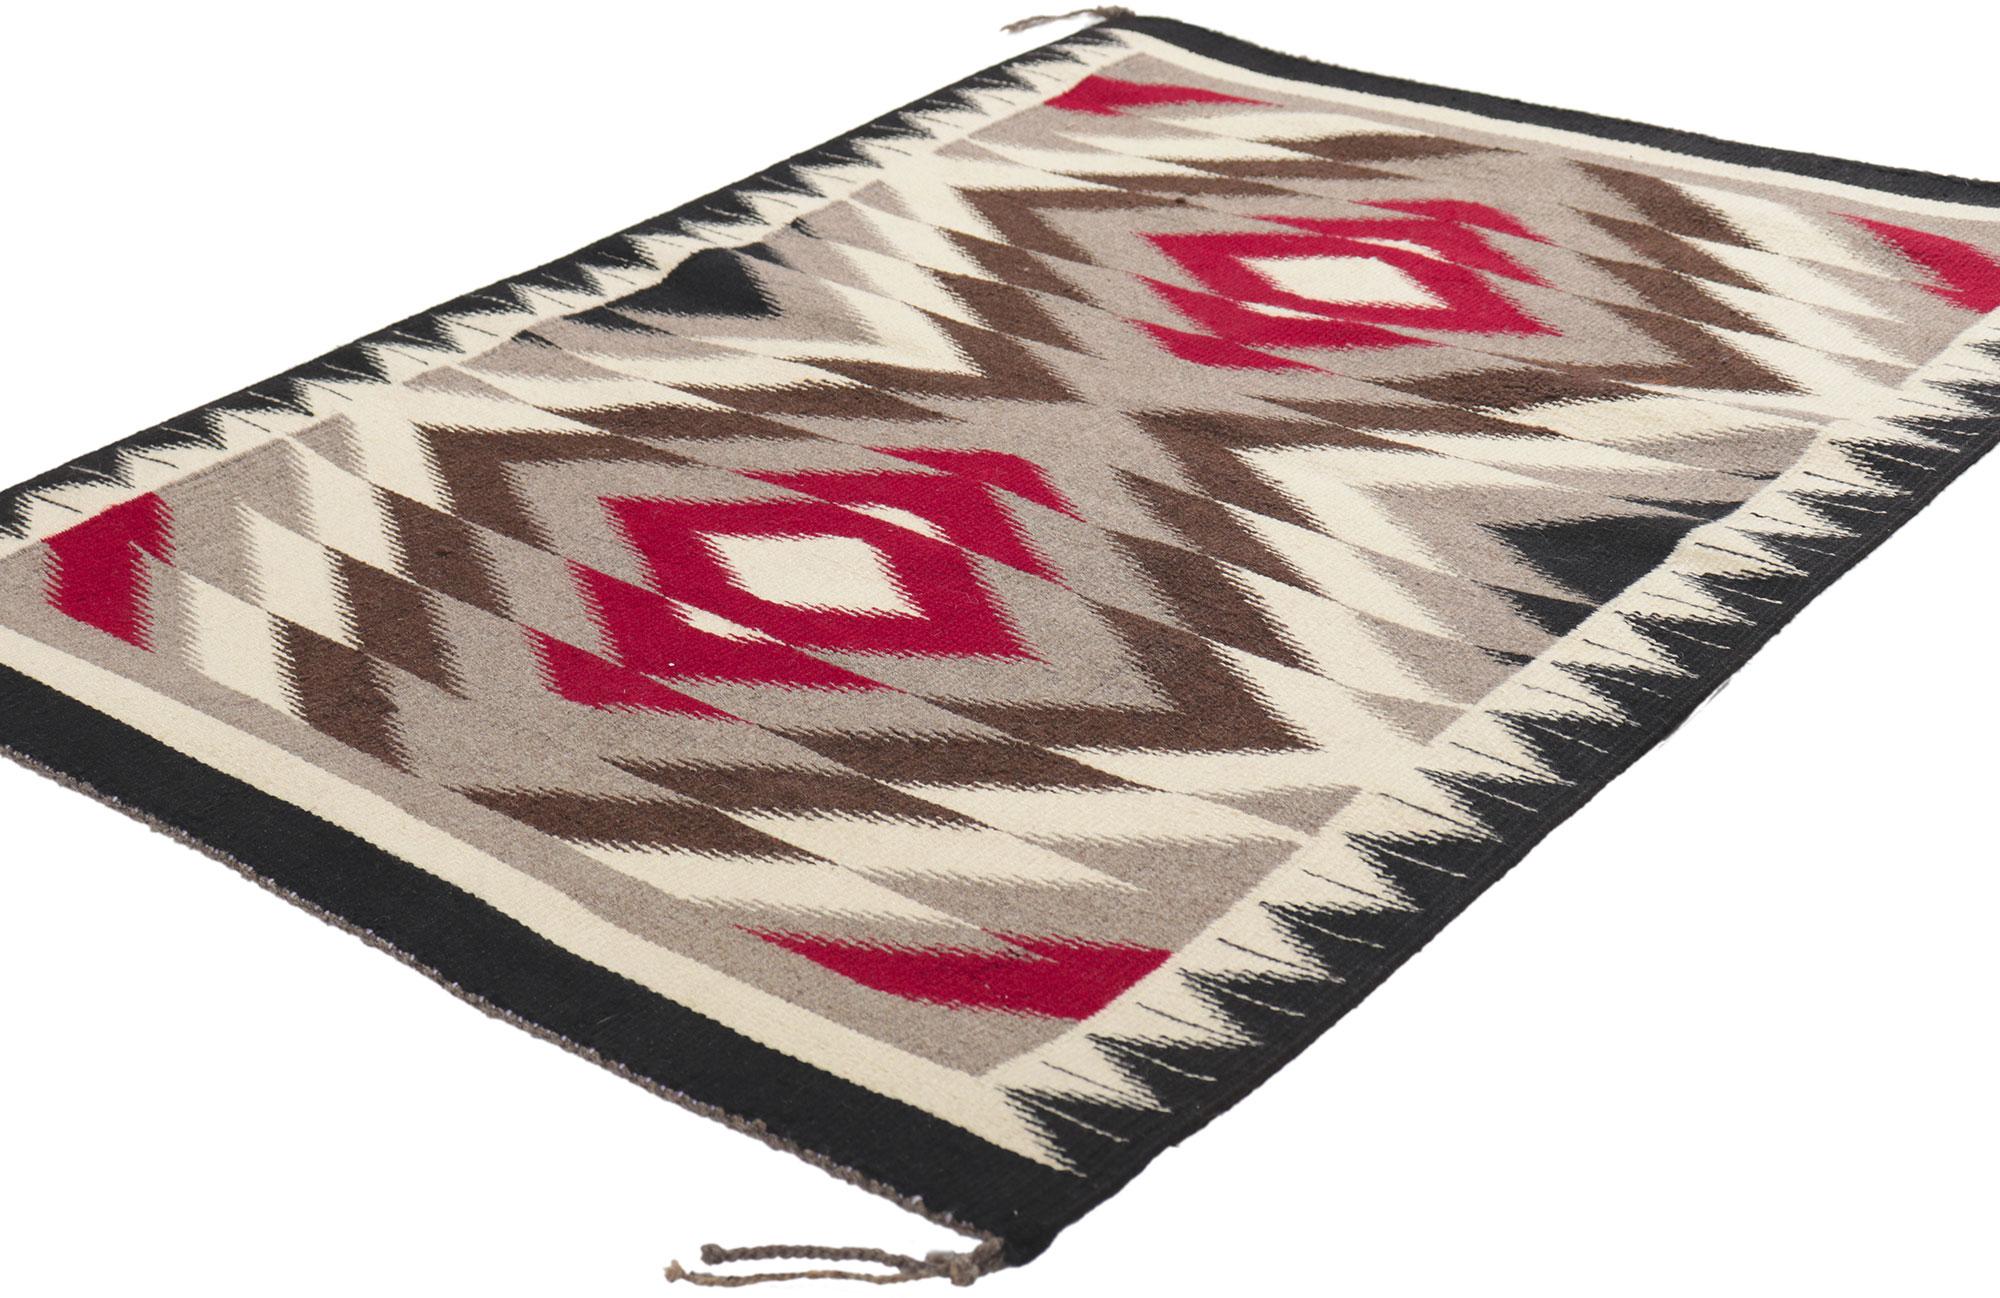 78424 Vintage Navajo Eye Dazzler Rug, 02'05 x 03'05. Full of tiny details and an expressive design, this handwoven wool vintage Navajo rug is a captivating vision of woven beauty. The abrashed field features a concentric lozenge. Rich in symbolism